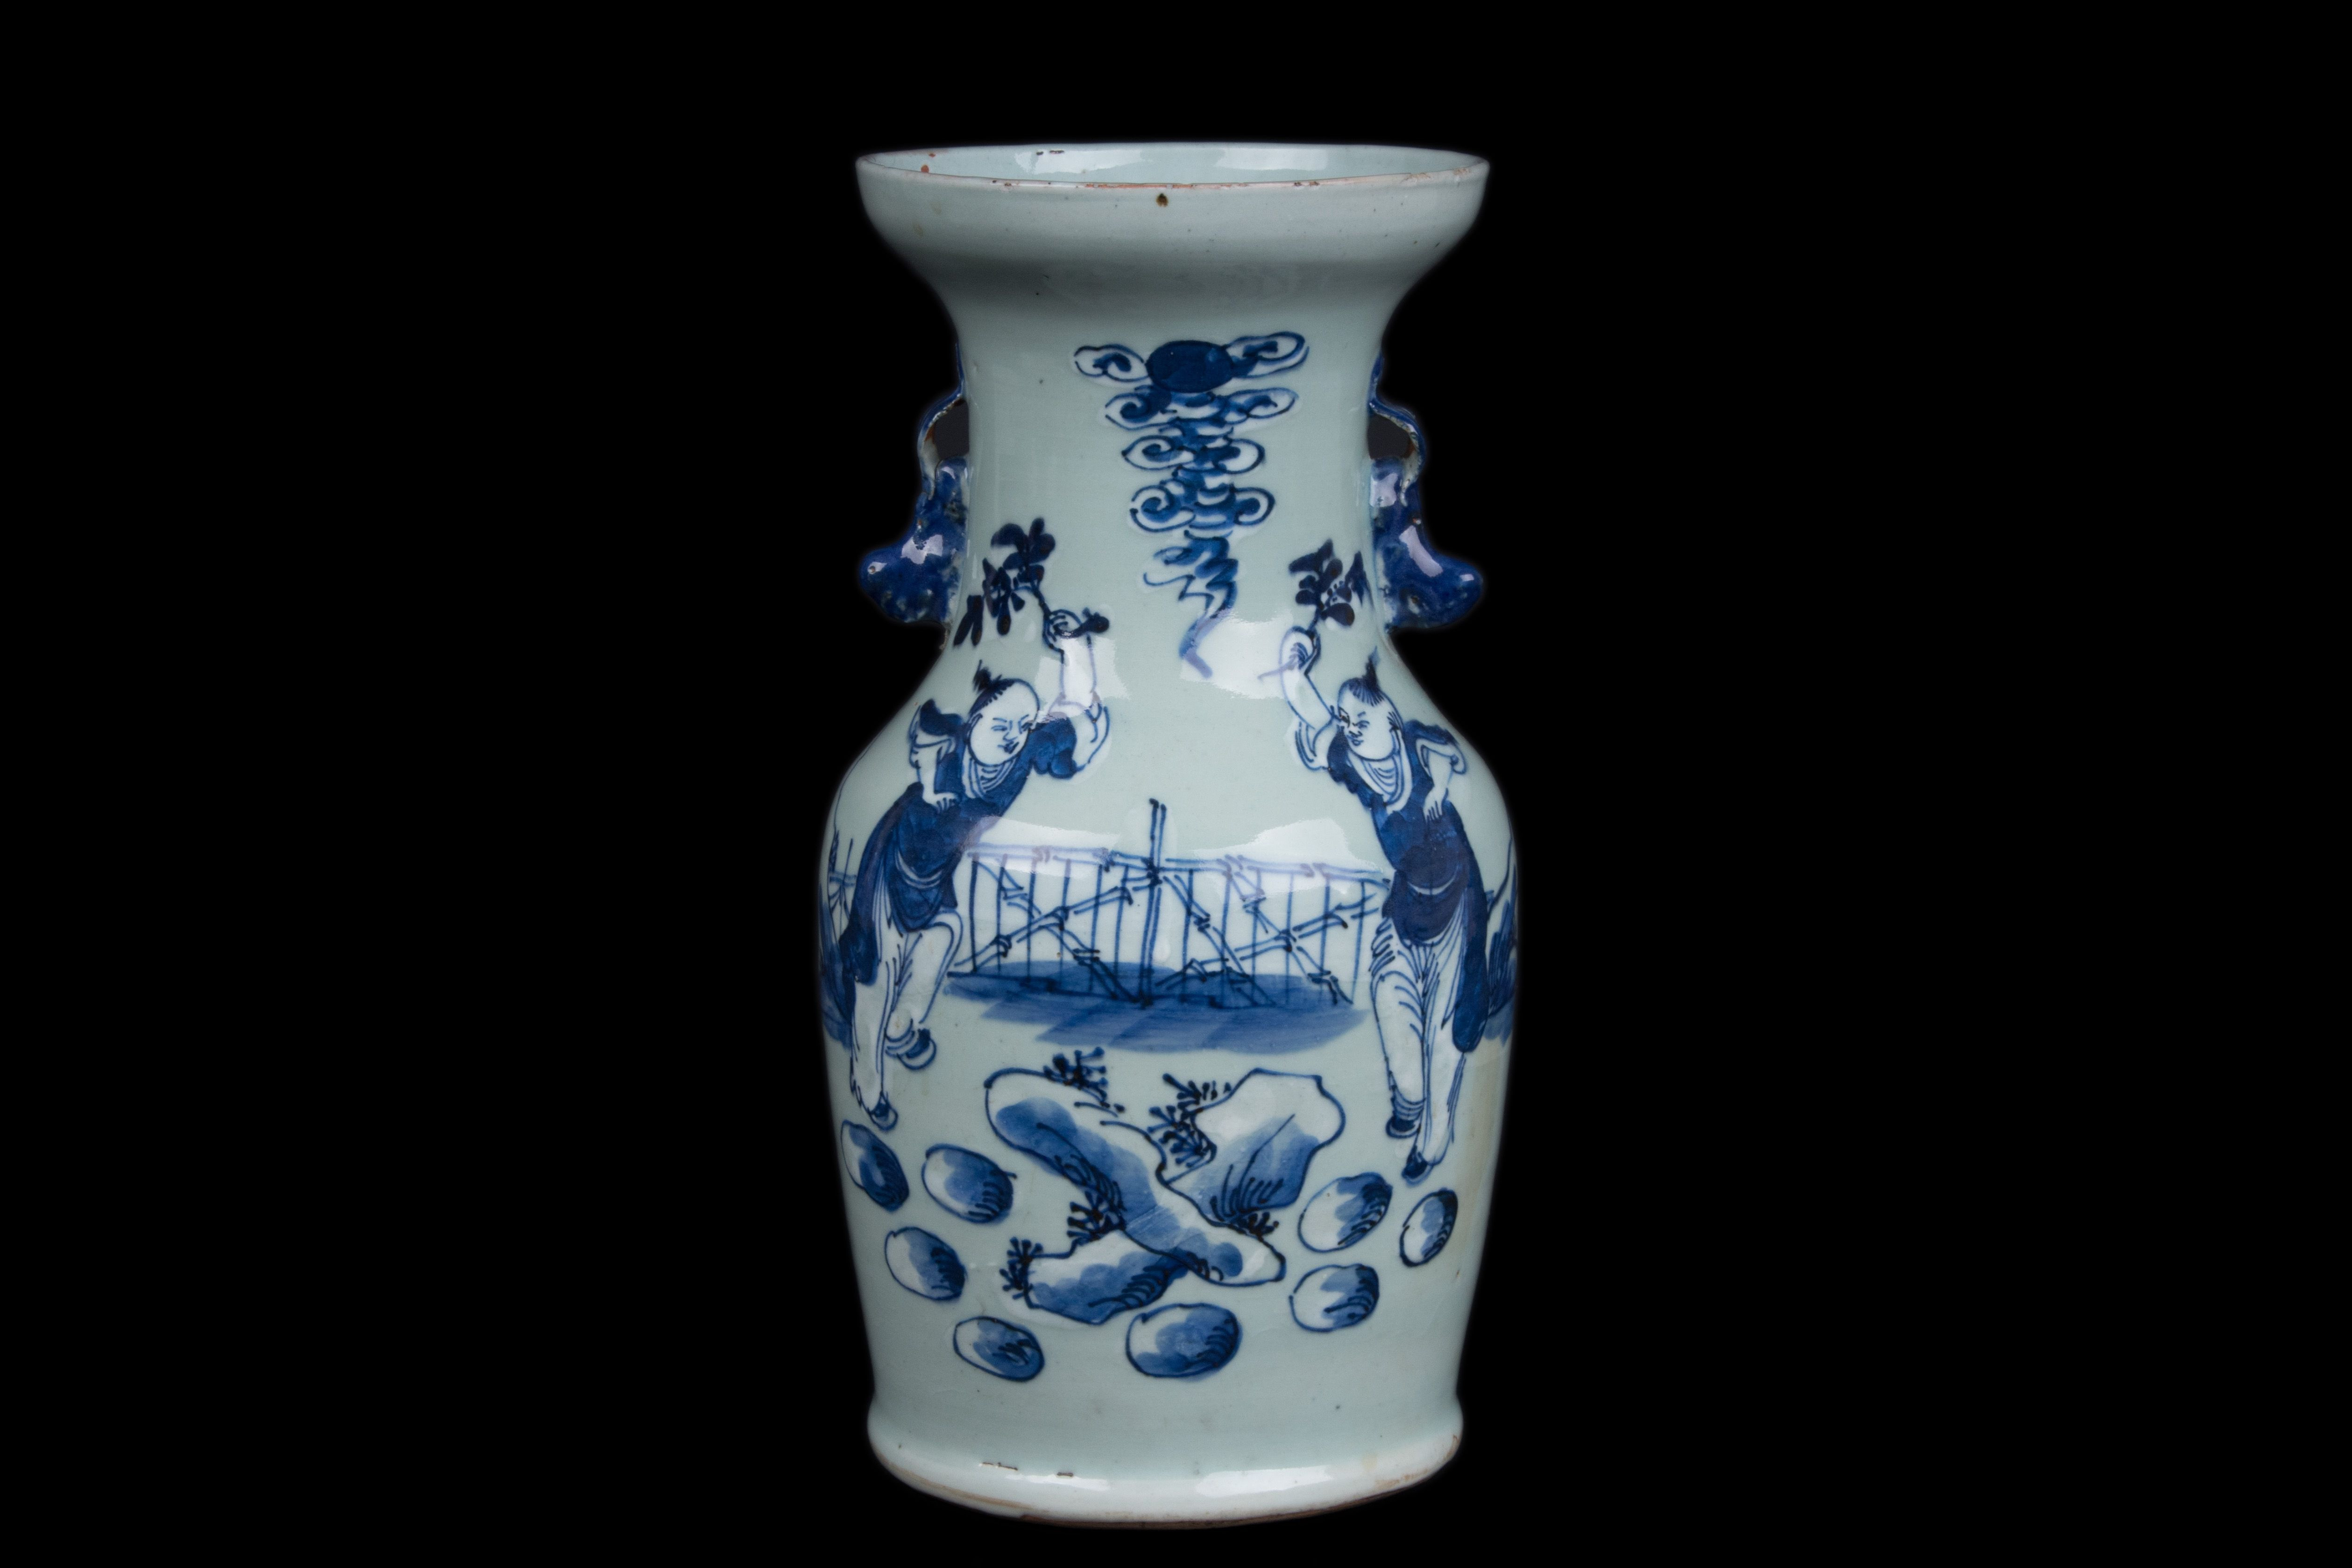 13 Cute Double Gourd Vase 2024 free download double gourd vase of description a chinese baluster vase cover decorated on regarding description a chinese blue white compact two handled baluster vase possibly decorated on